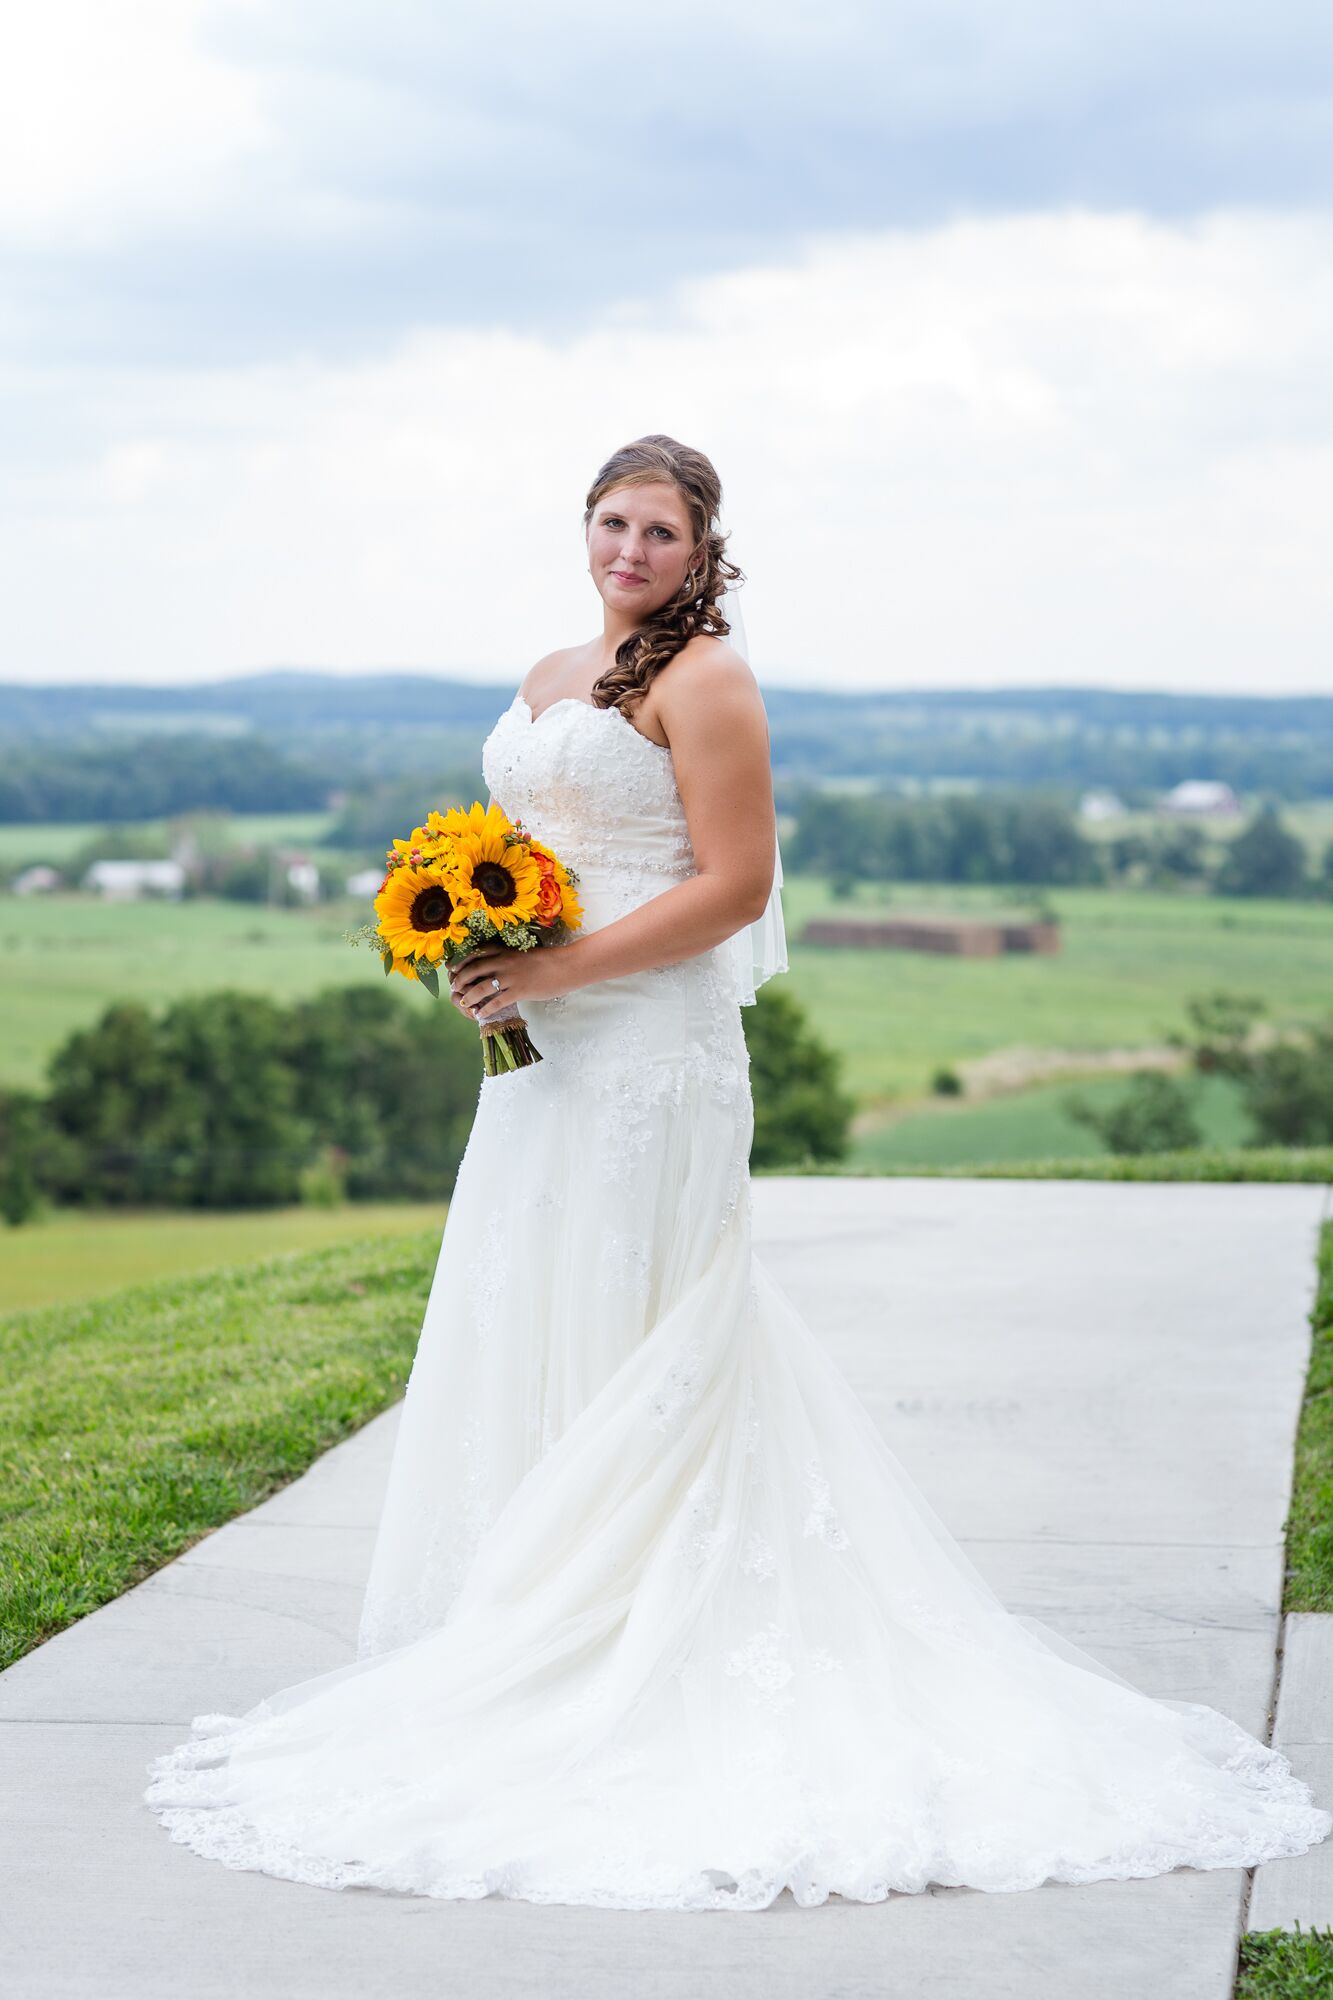 Strapless, Lace, TrumpetFit Wedding Dress and Sunflower